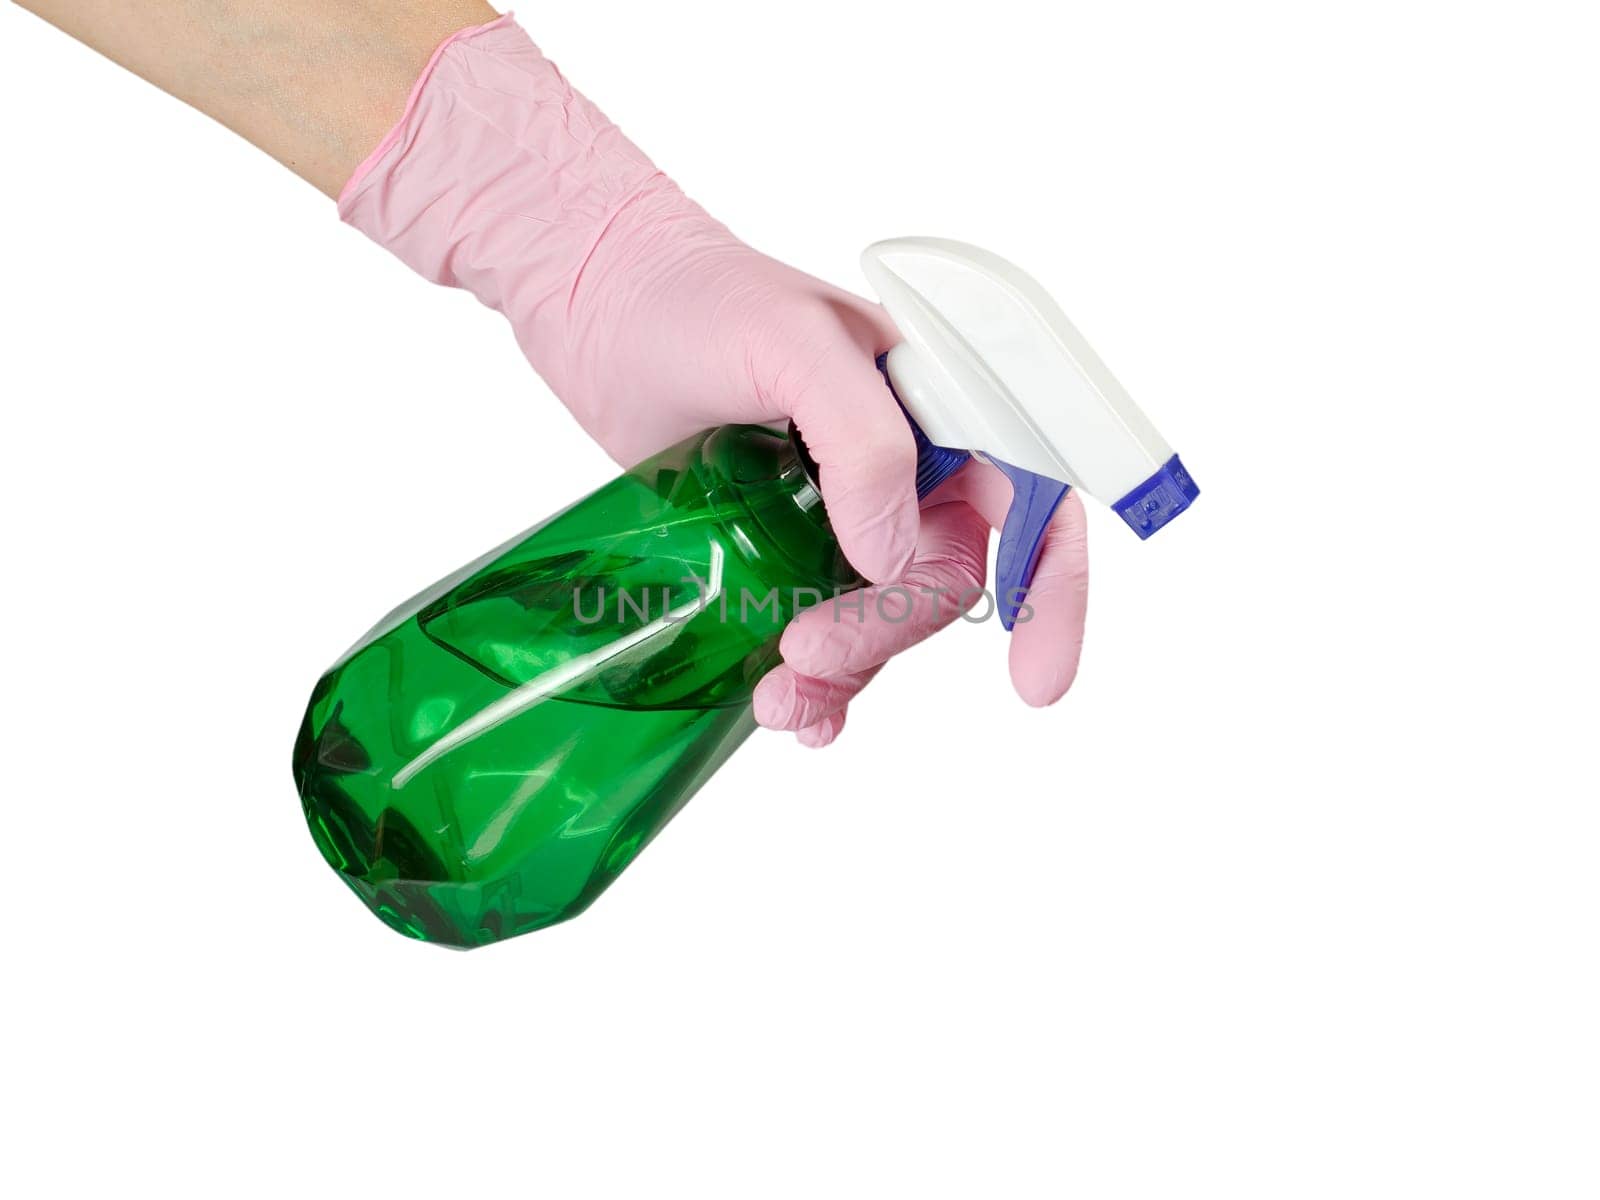 Woman's hand in a rubber glove with a pressure sprayer with water on the white isolated background. Garden tools and equipment.